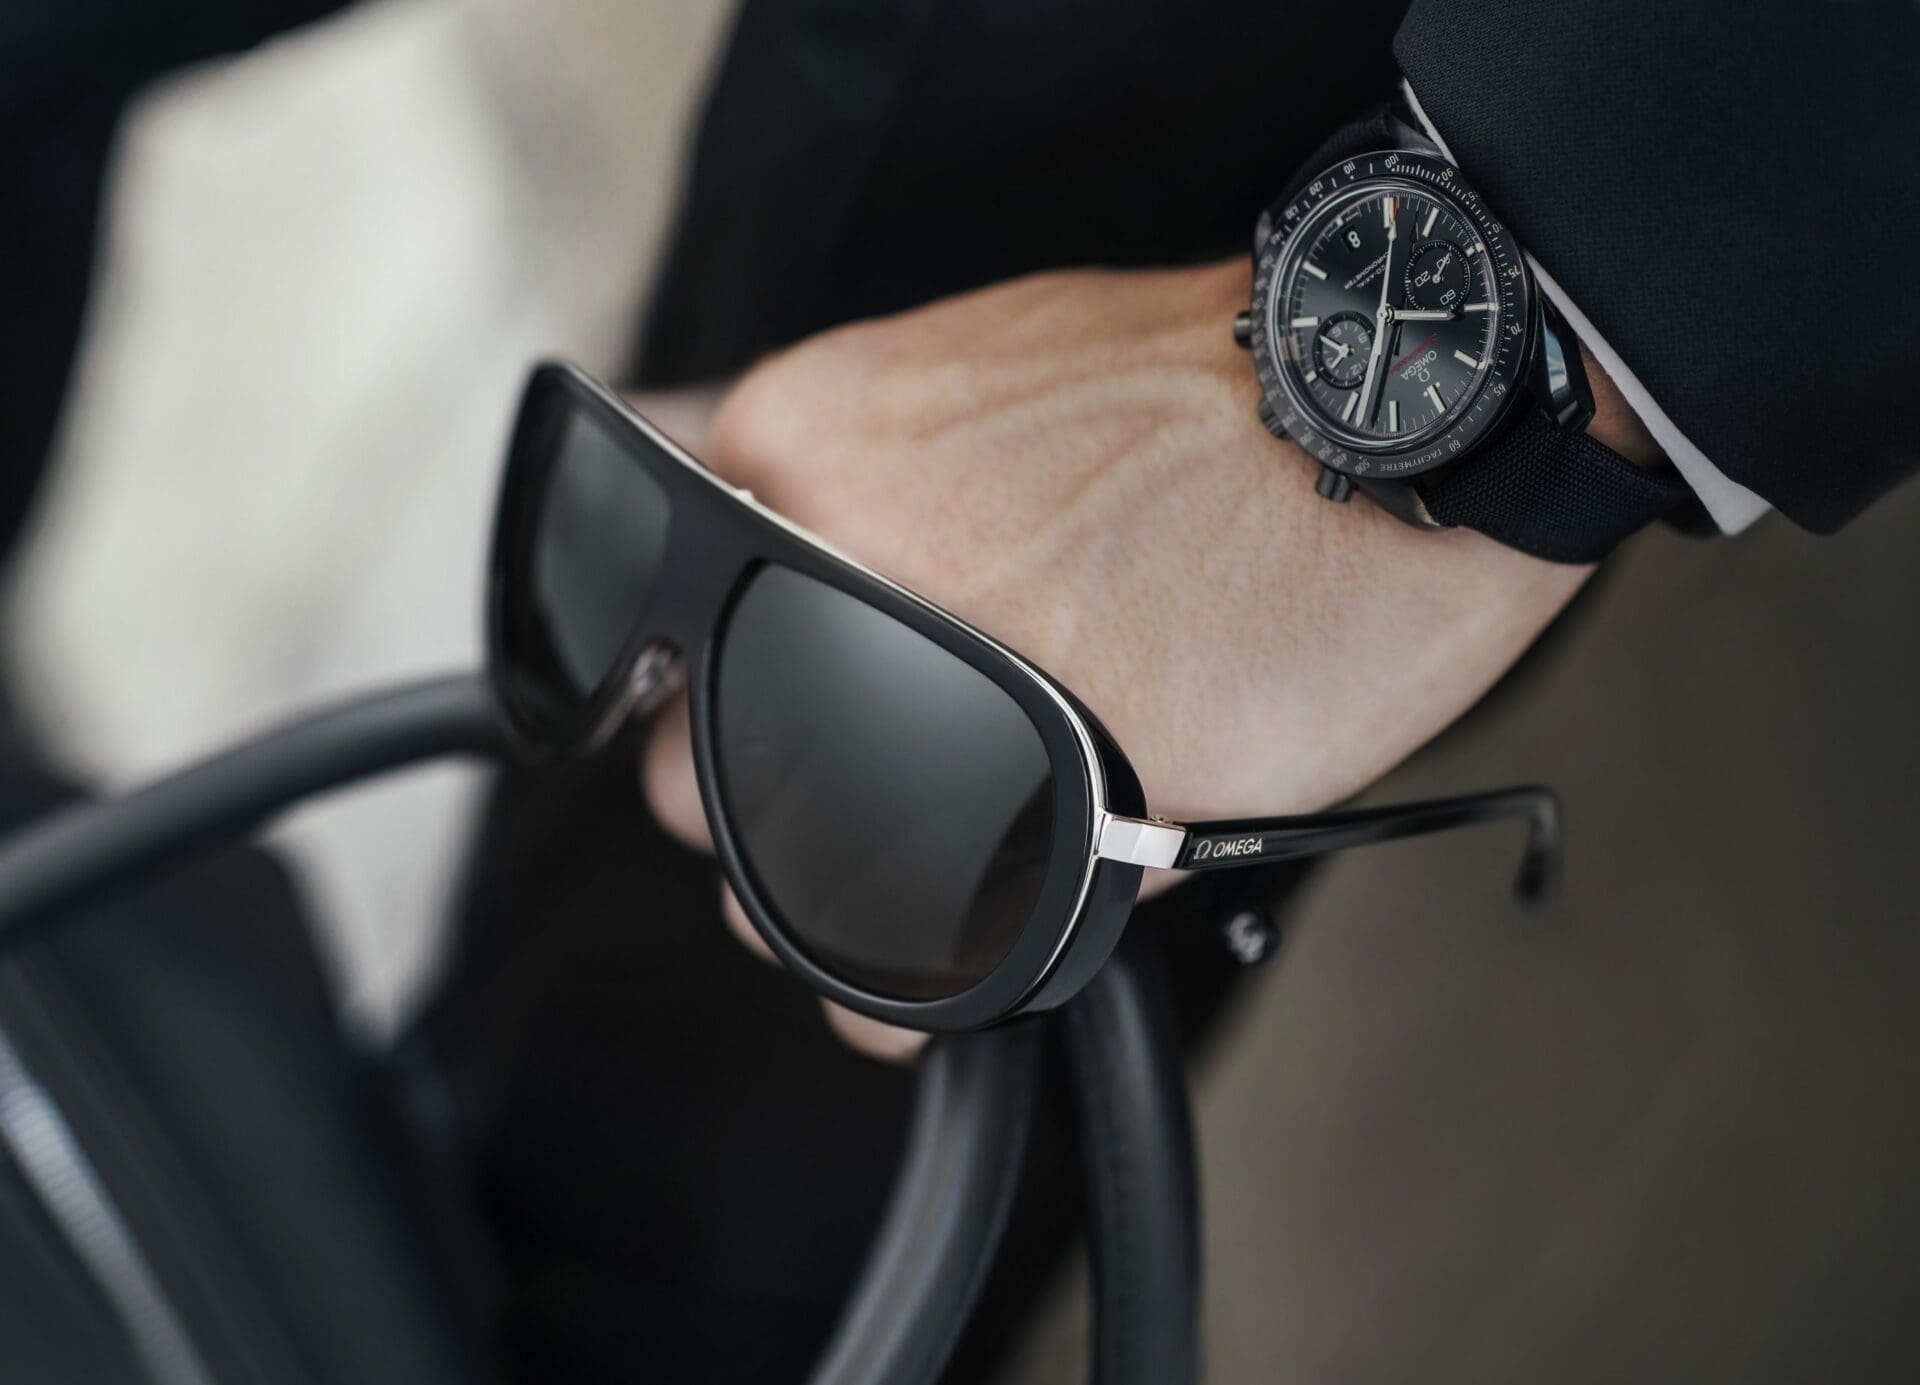 BREAKING NEWS: Omega launches eyewear collection, and we have a pair (with pricing)